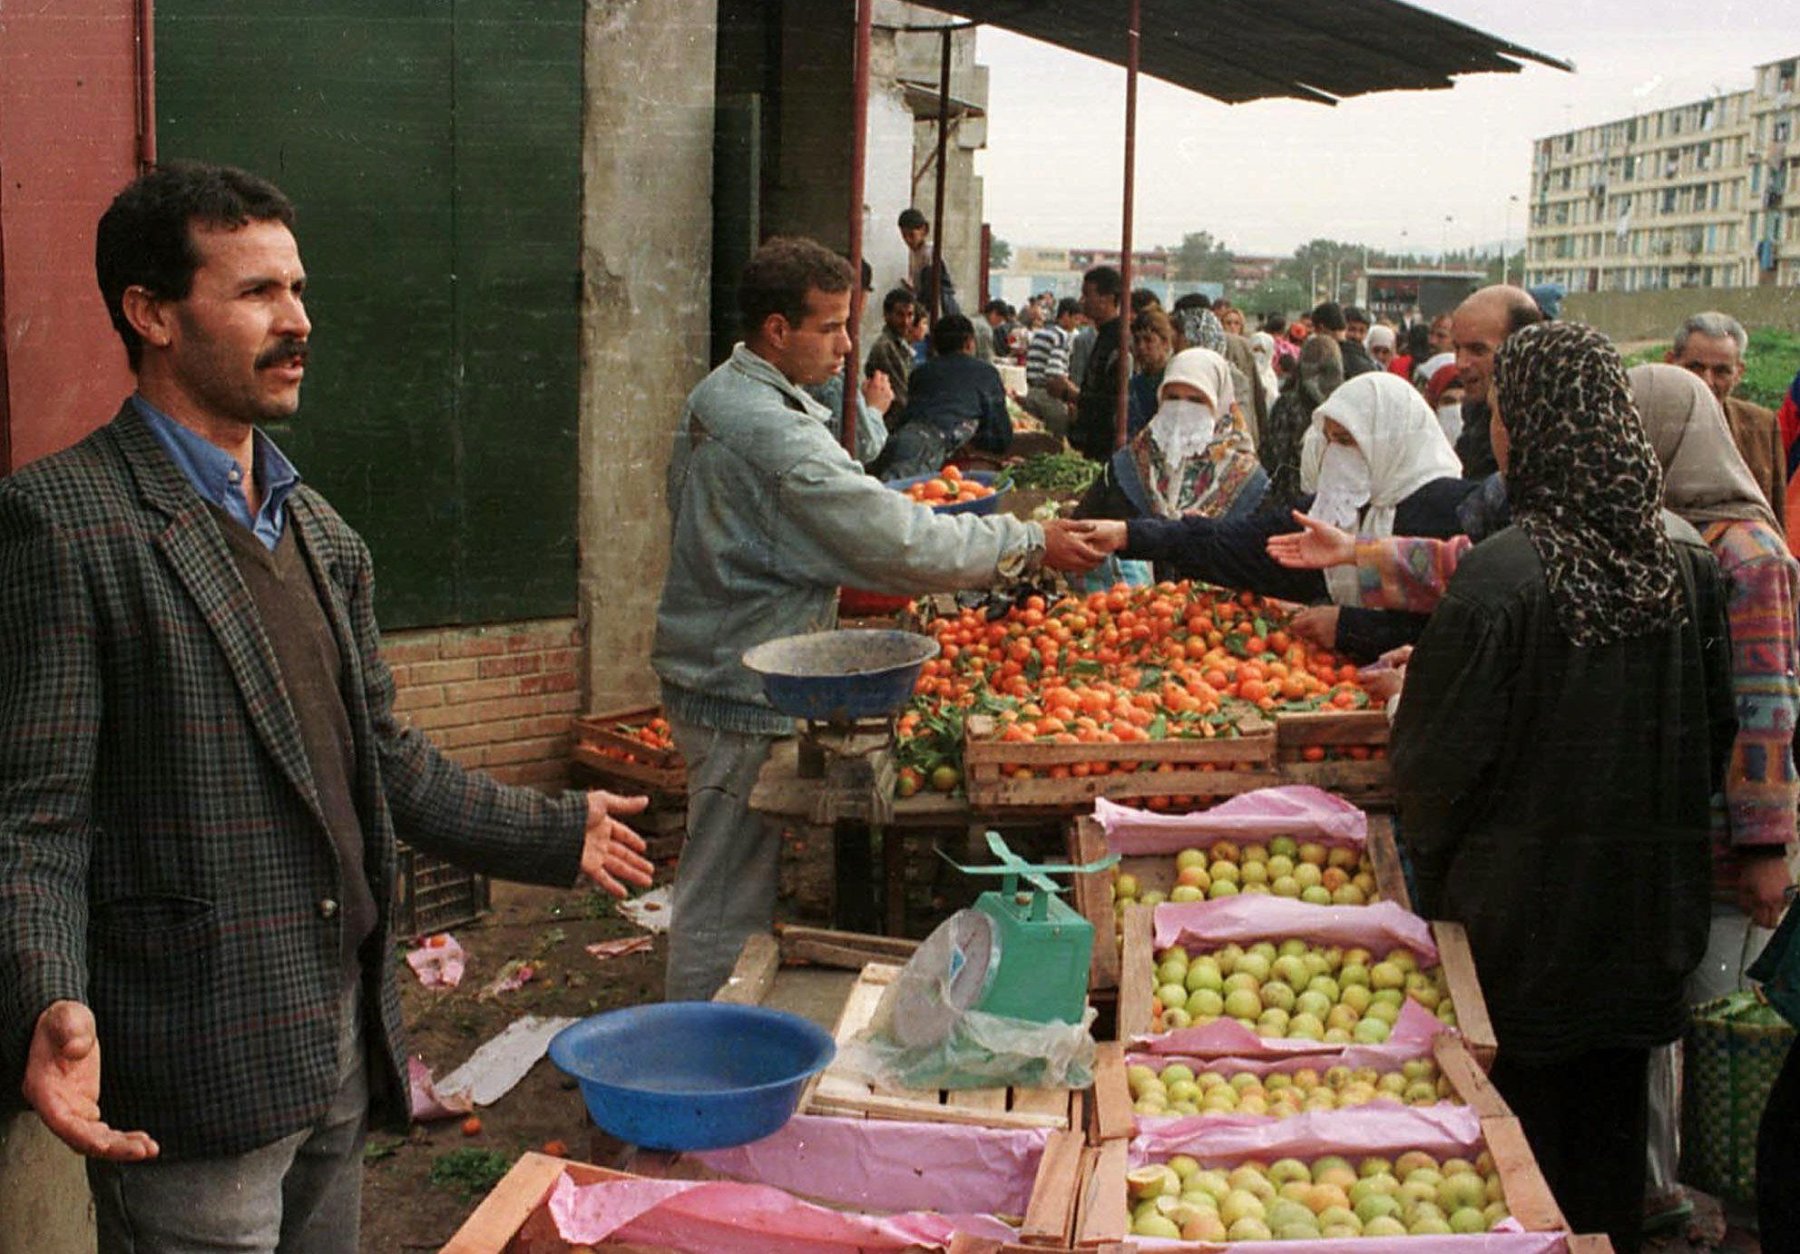 Algerians of the Badjarah district of Algiers go shopping in preparation for the holy month of Ramadan, Tuesday Dec. 30, 1997.  Road-side attackers and village raiders wielding knives and guns killed 58 people in Algeria in recent days according to witnesses and newspaper reports Tuesday. (AP PHOTO)